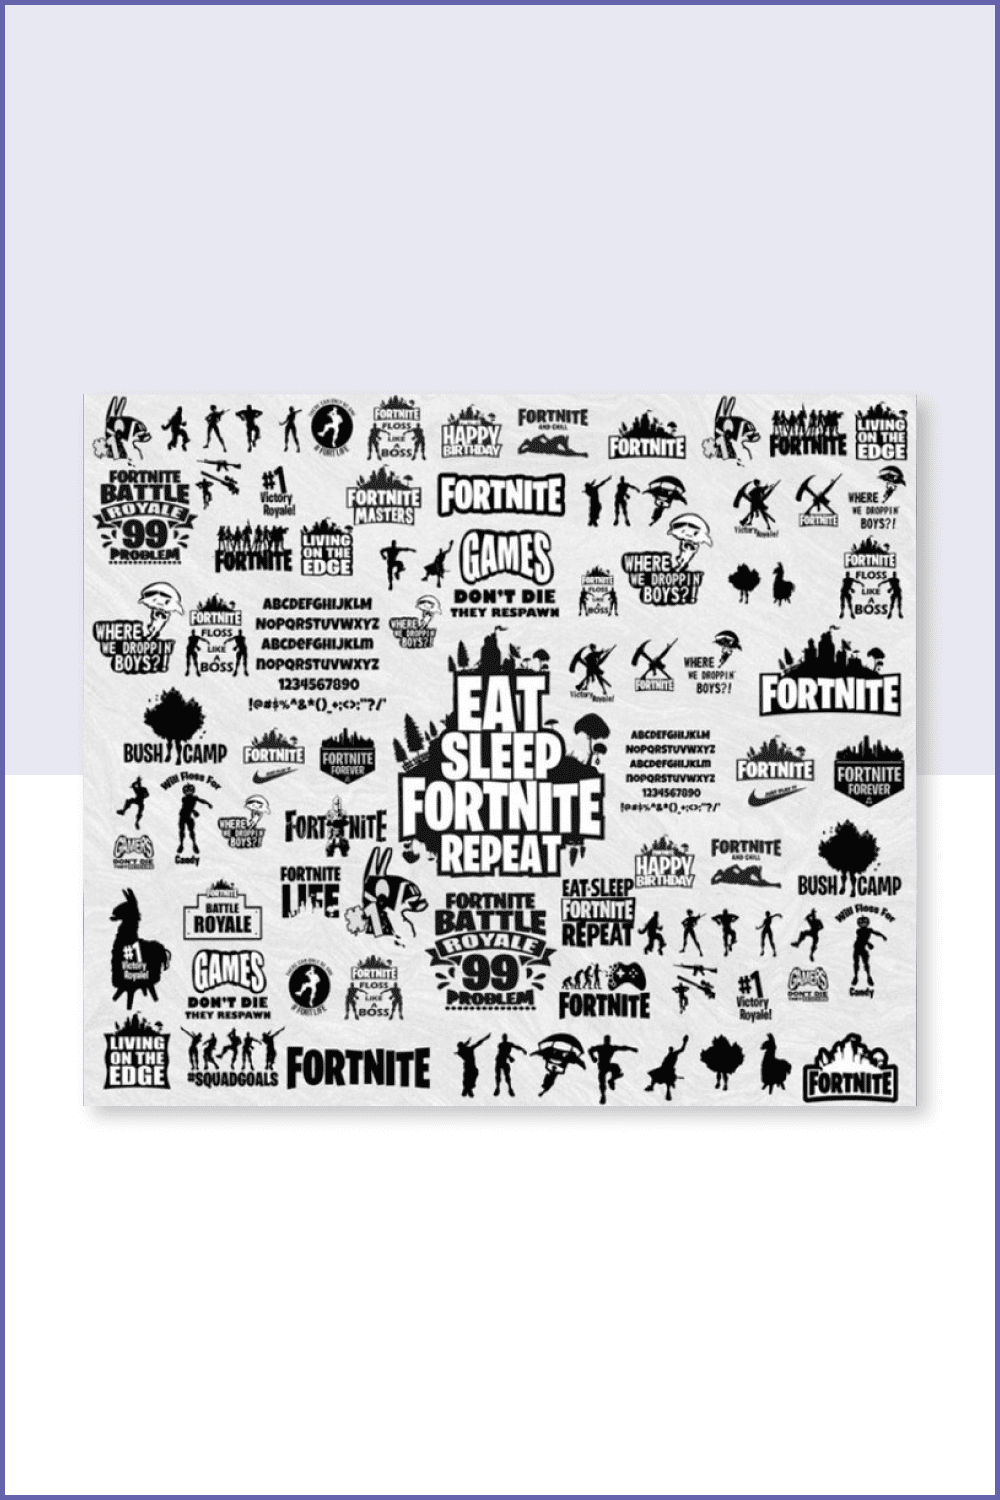 Collage of a large number of stickers with text and silhouettes of gamers.